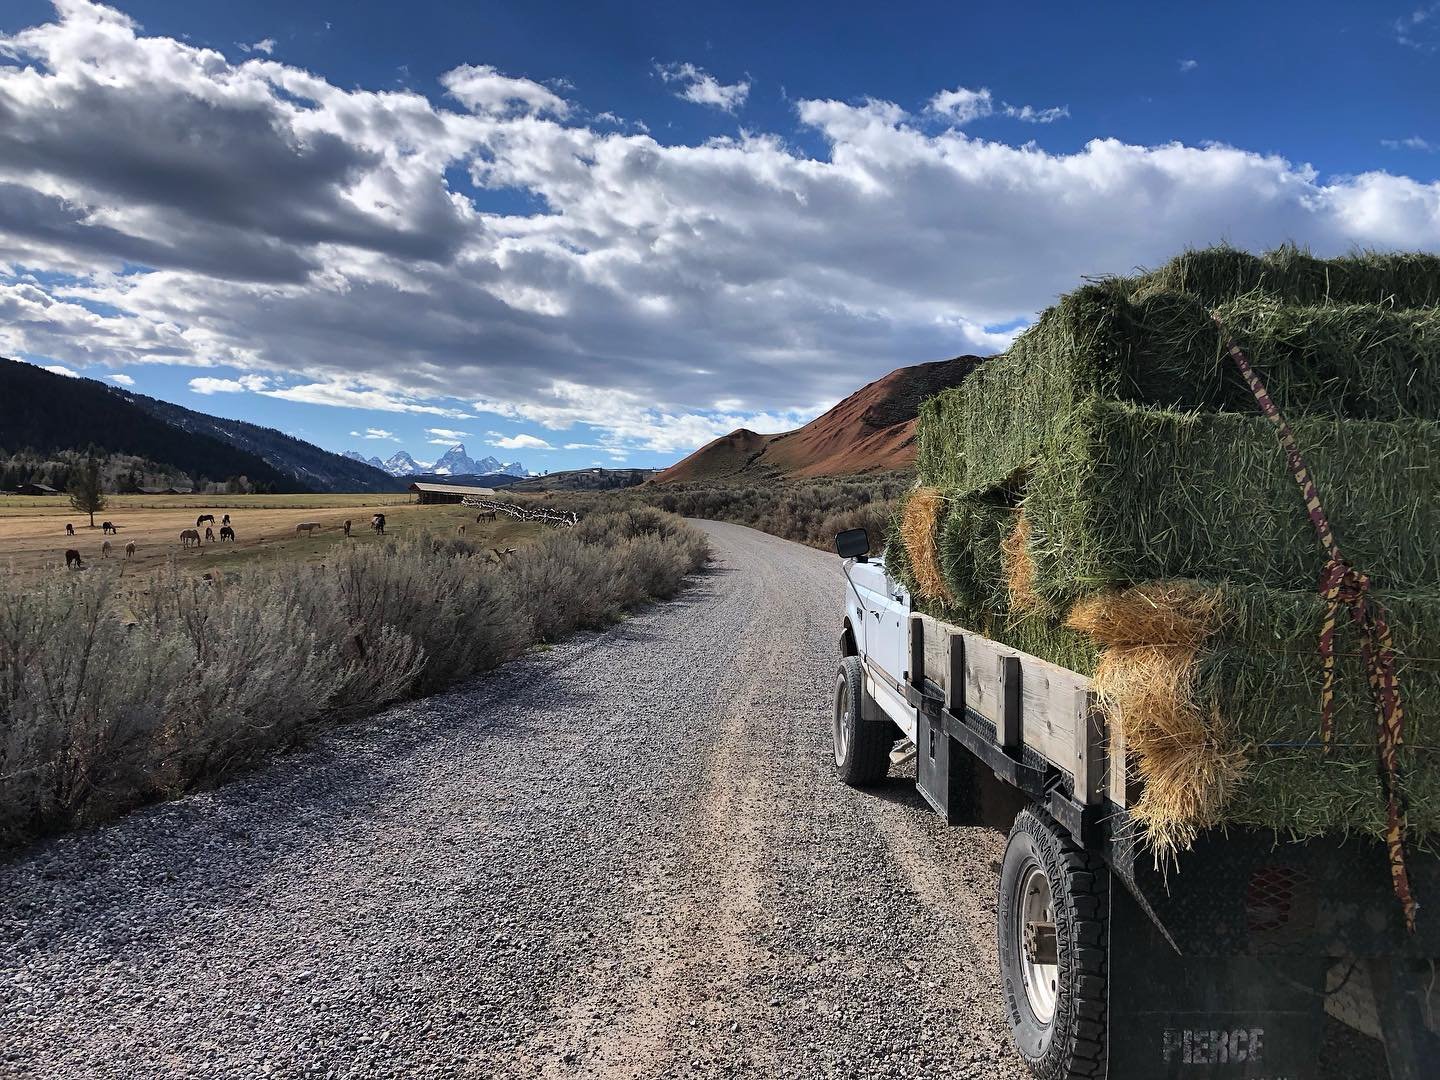 If your going to work job with long hours, make sure it has a nice office view! Cowboy logic pure and simple. Get on a Trail Ride with JH Outfitting Company and let us show you the best view of the Tetons in the Valley! Link in bio for more info.

ww